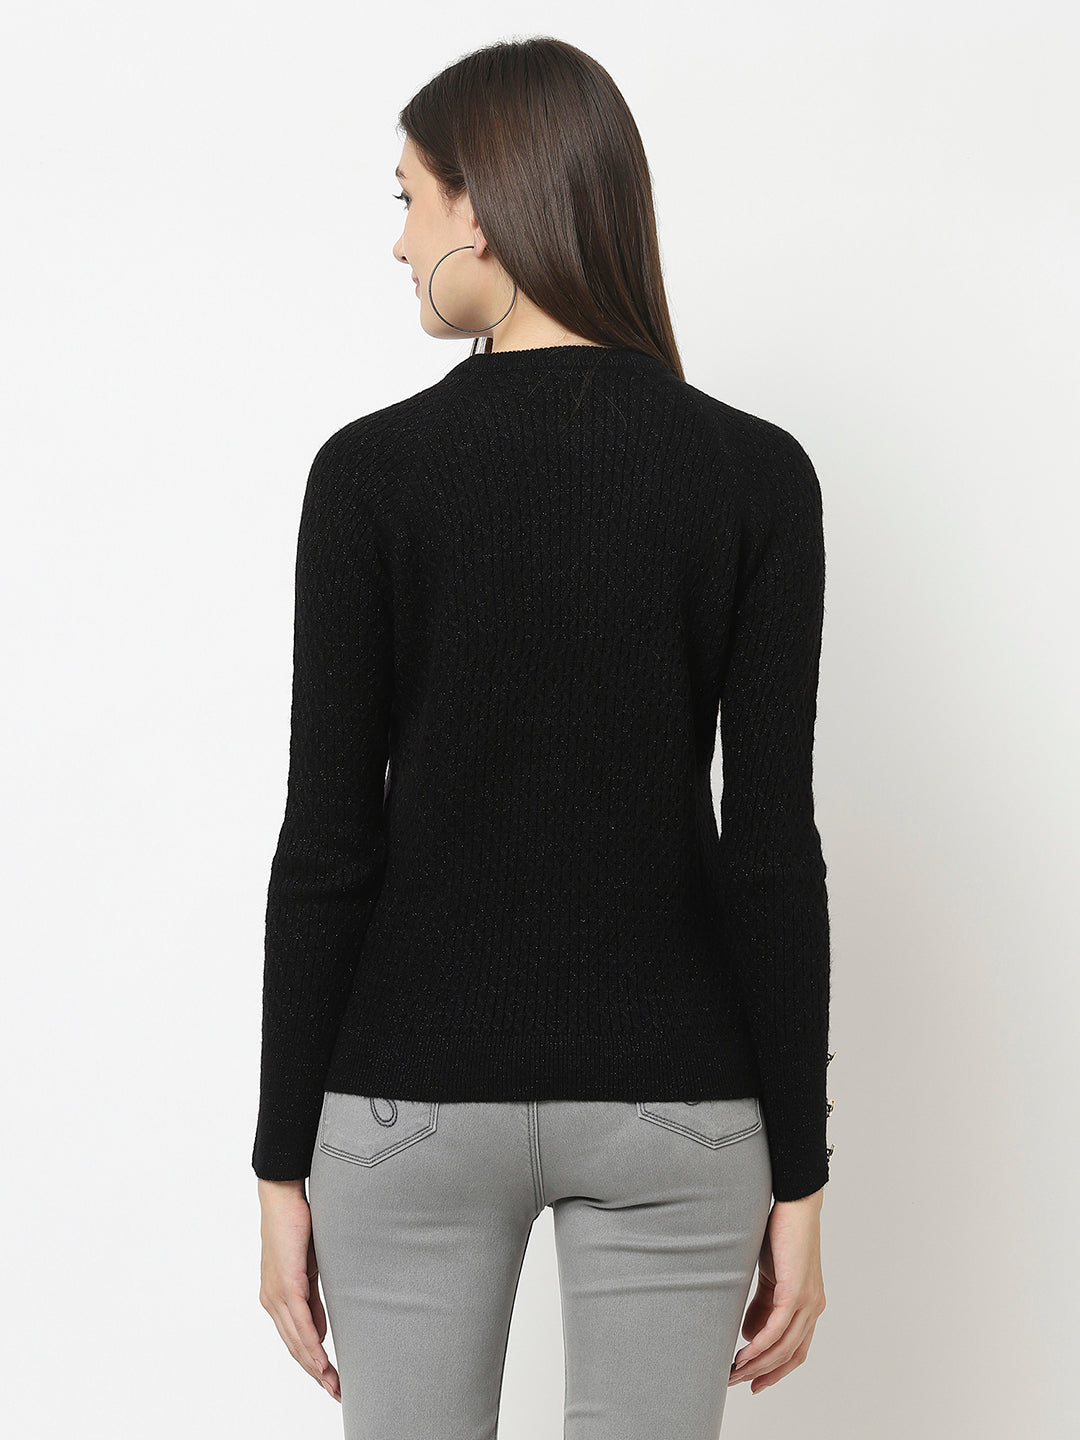 Black Knitted Sweater with Button Detailing